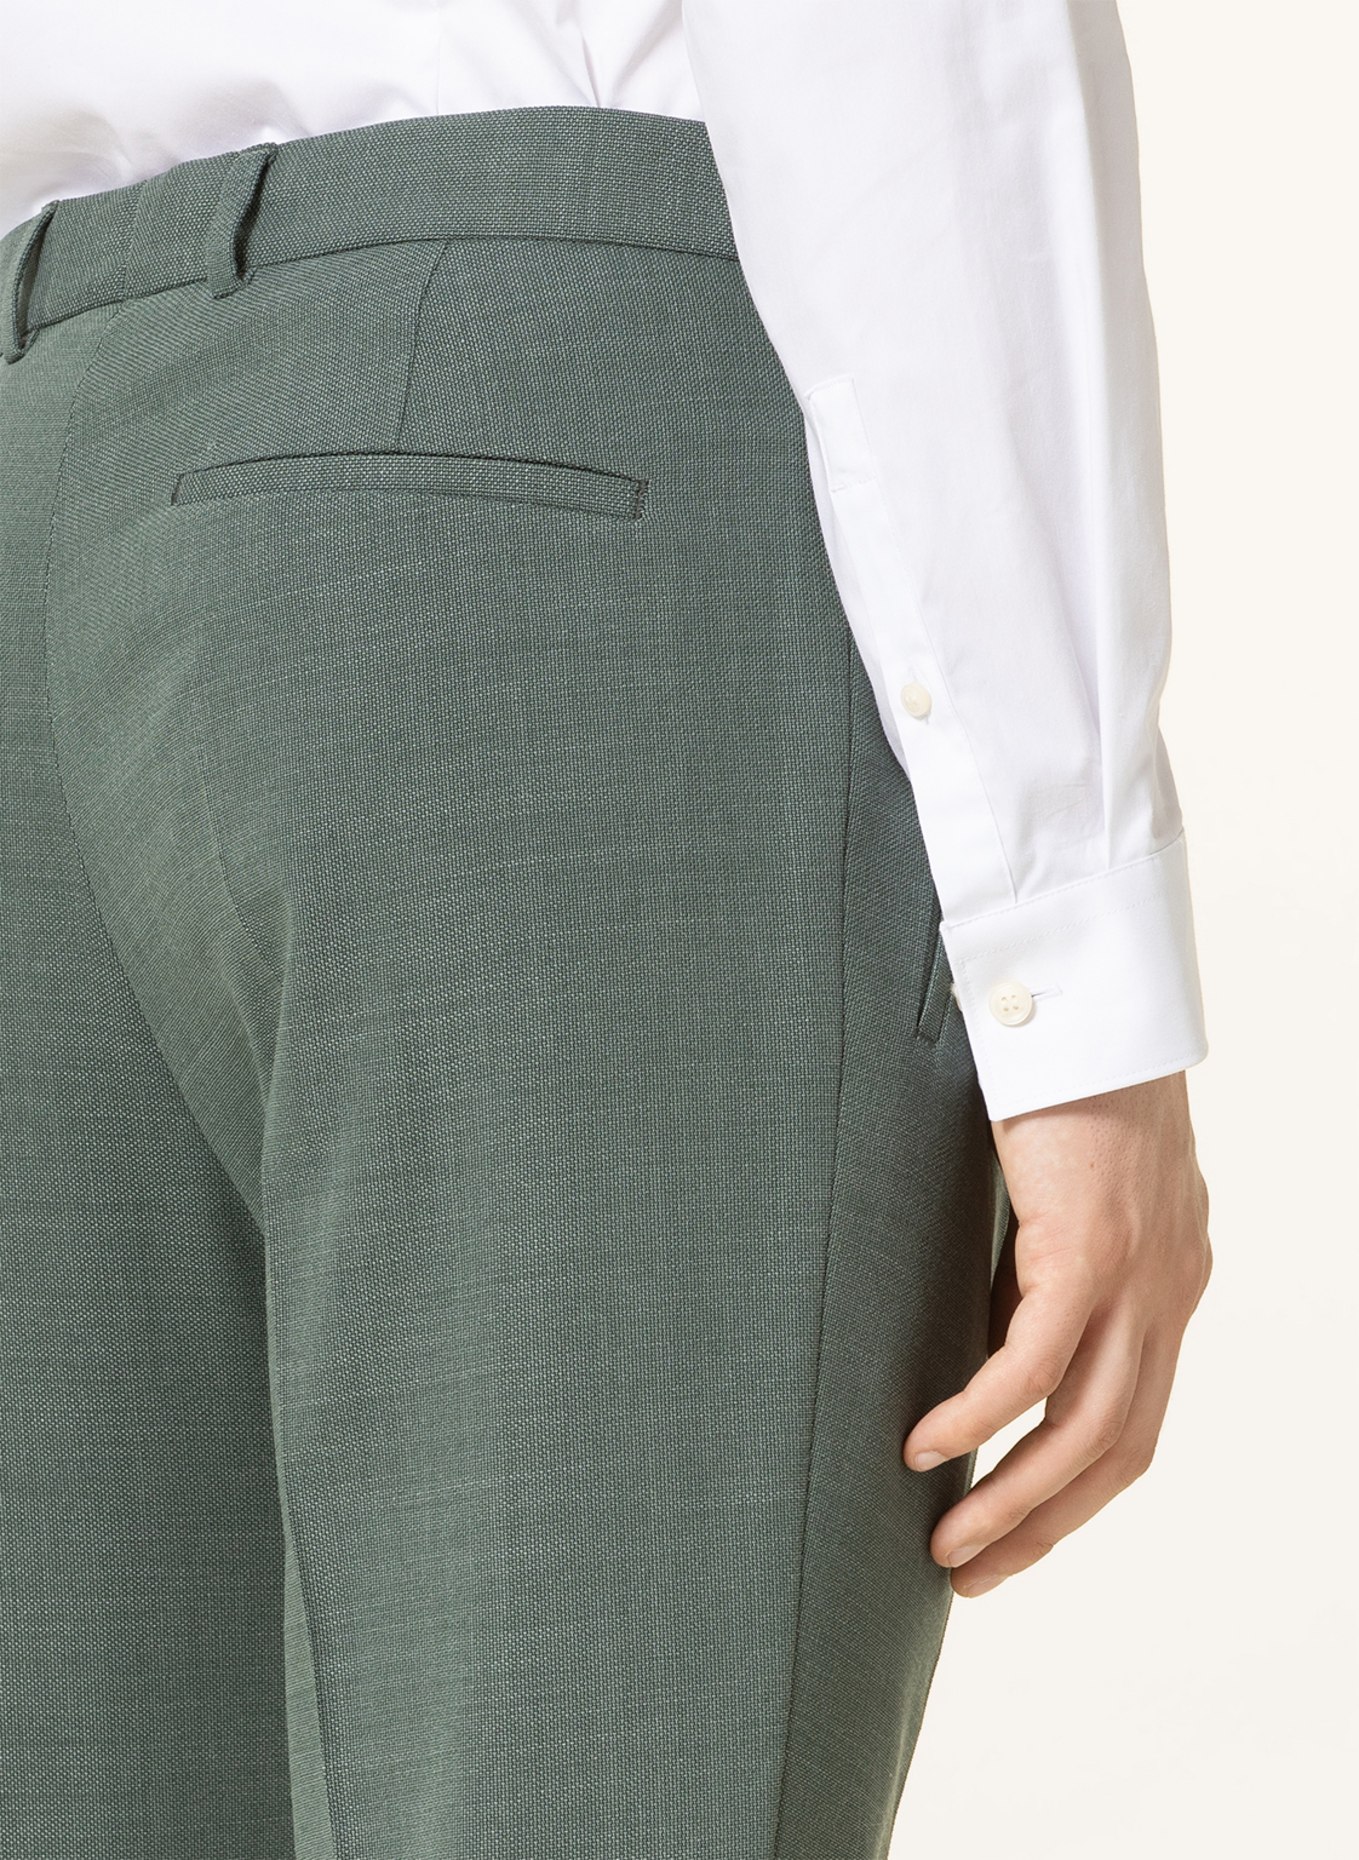 STRELLSON Suit pants LUIS relaxed fit, Color: 310 Medium Green               310 (Image 4)